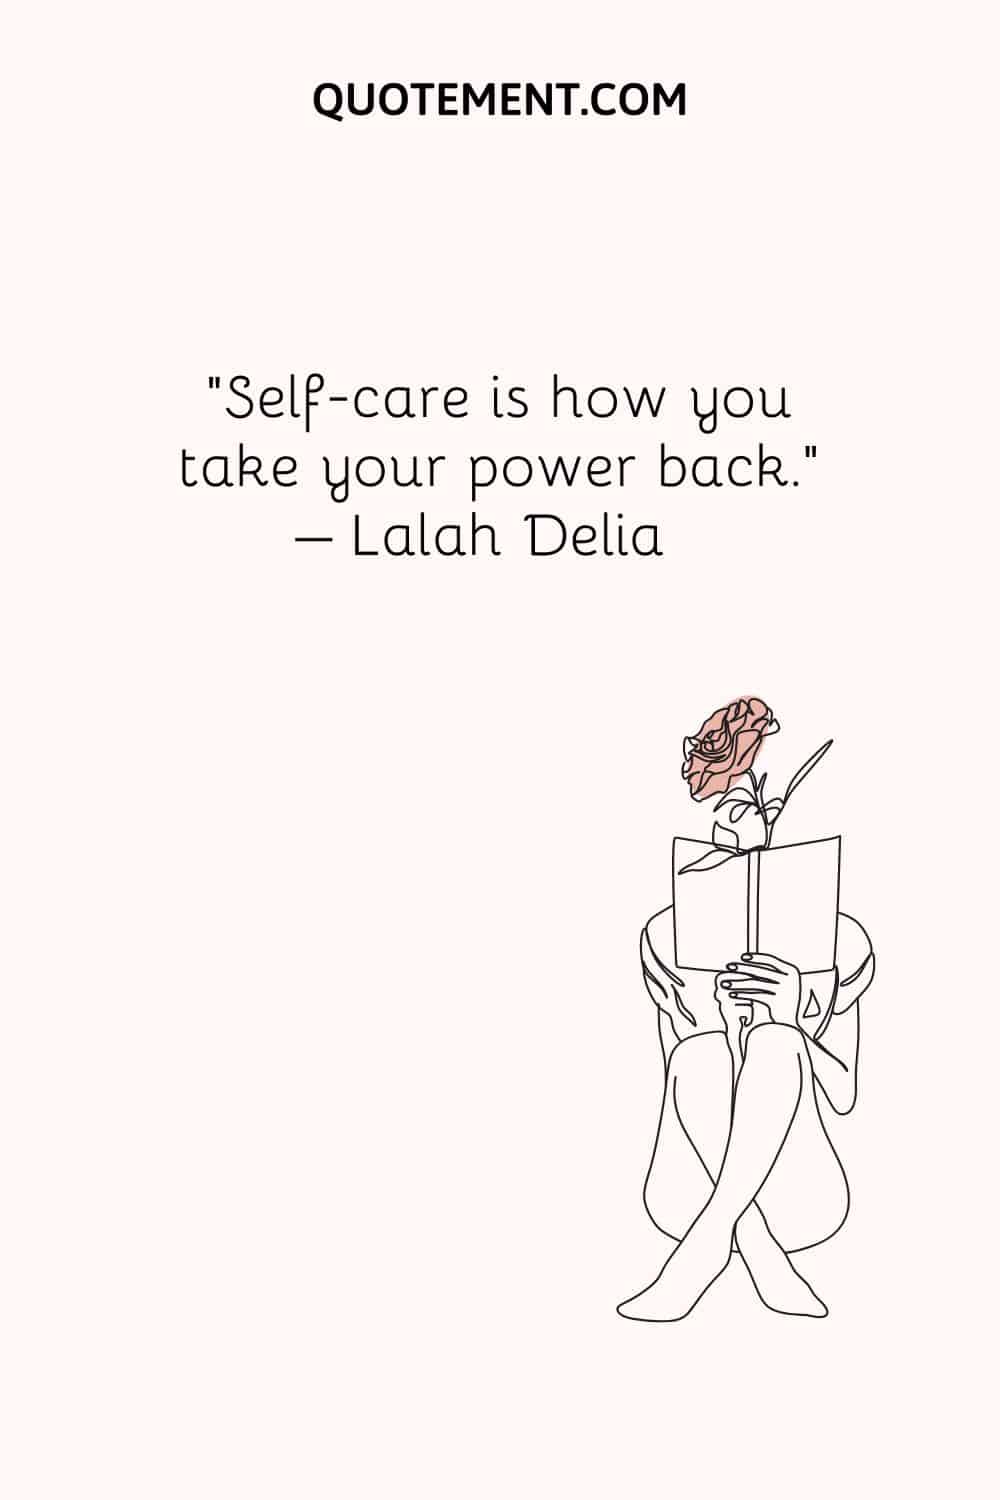 Self-care is how you take your power back